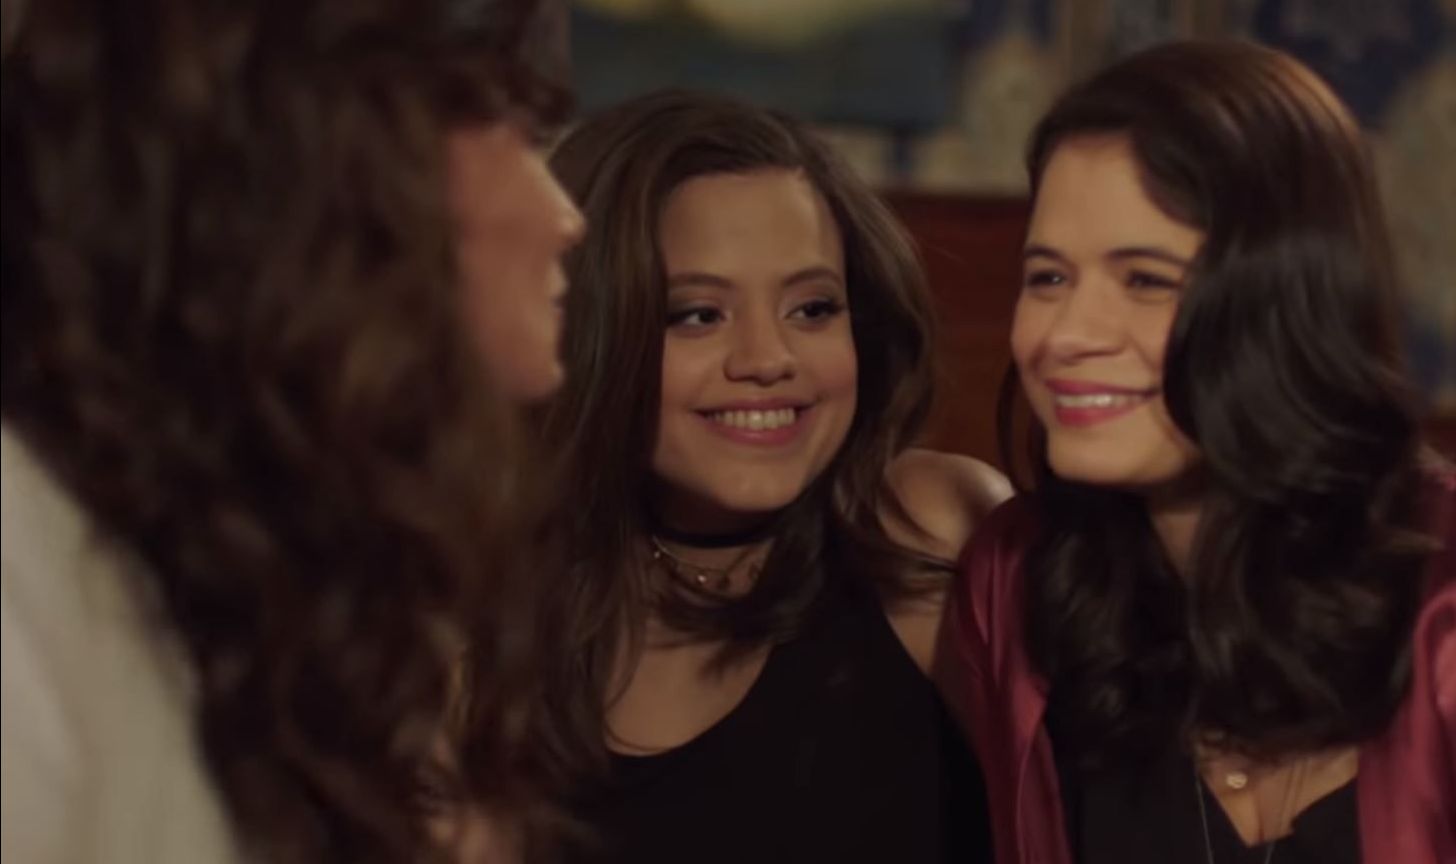 The Charmed Reboot Has Released Their First Trailer And People Aren't Happy